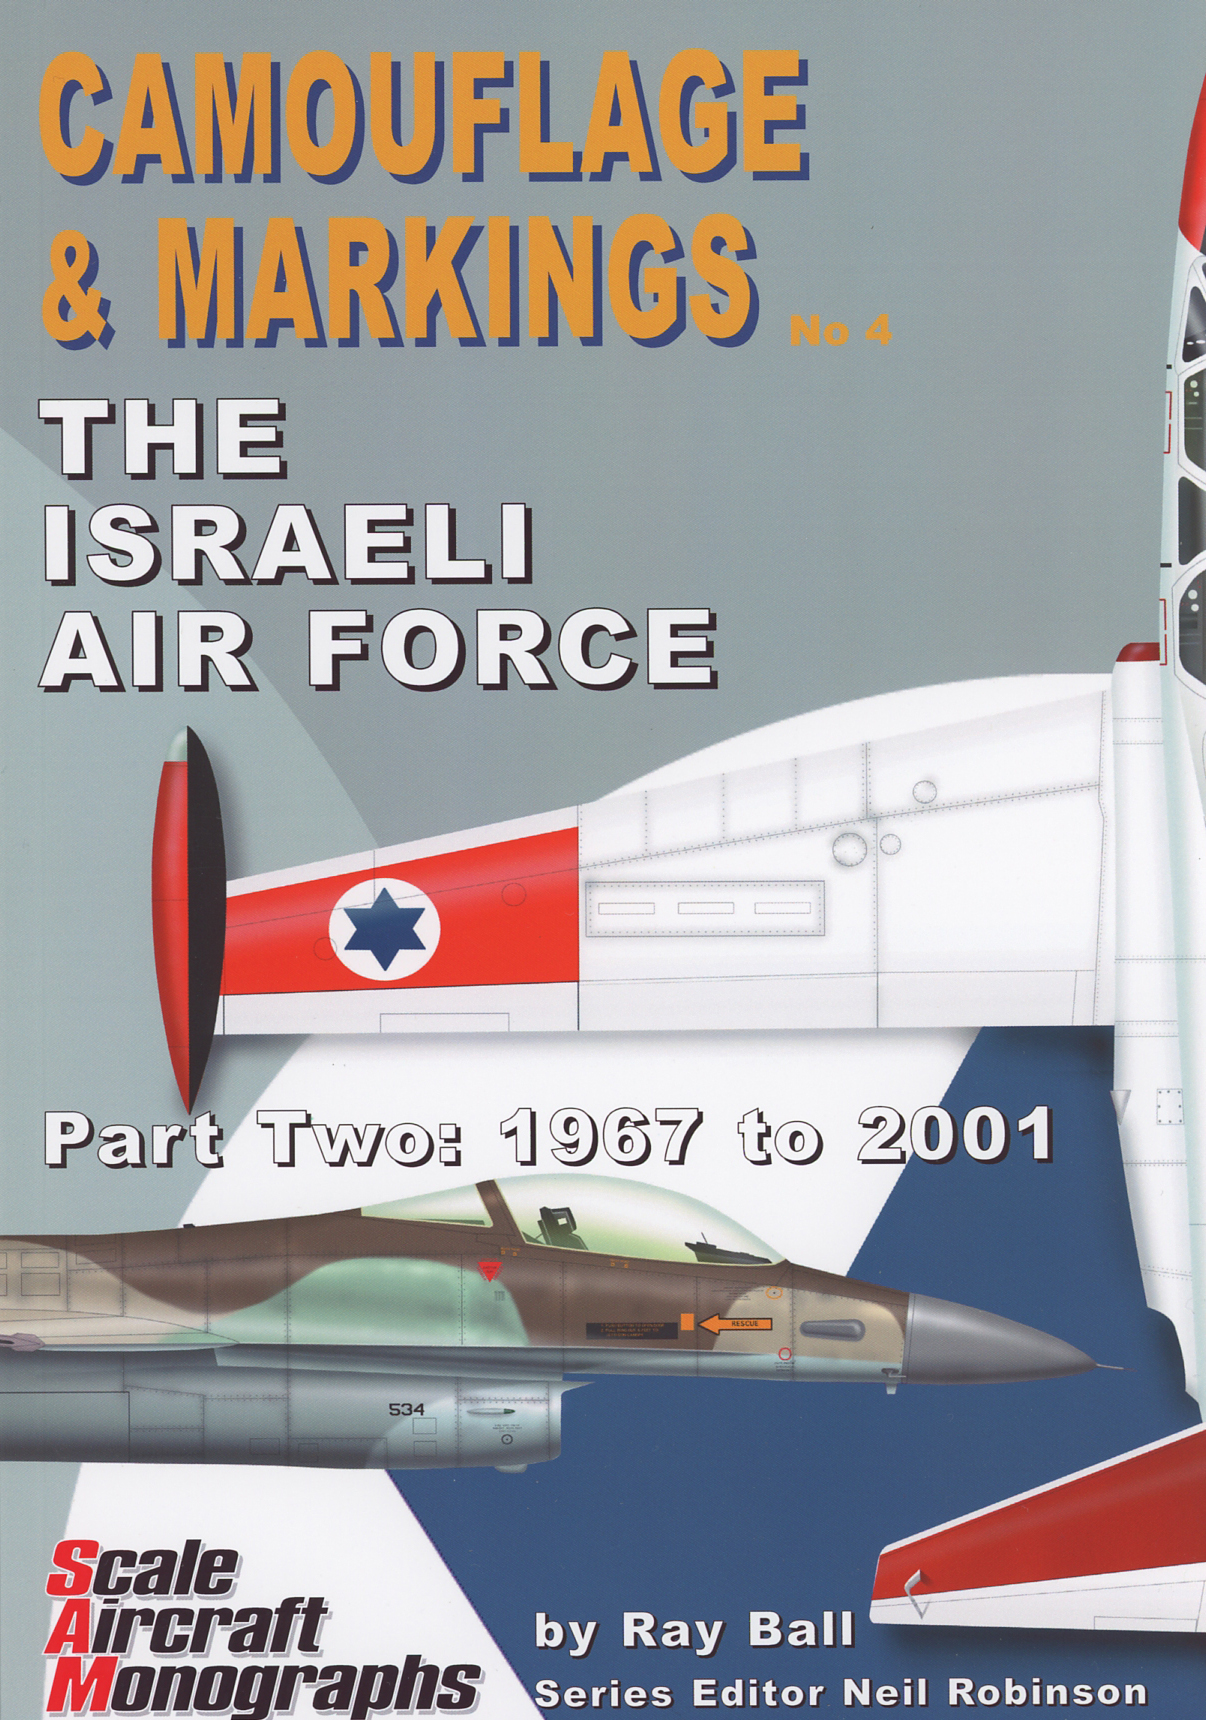 Guideline Publications Camouflage & Markings 4 The Israeli Air Force Part 2: 1967-2001 